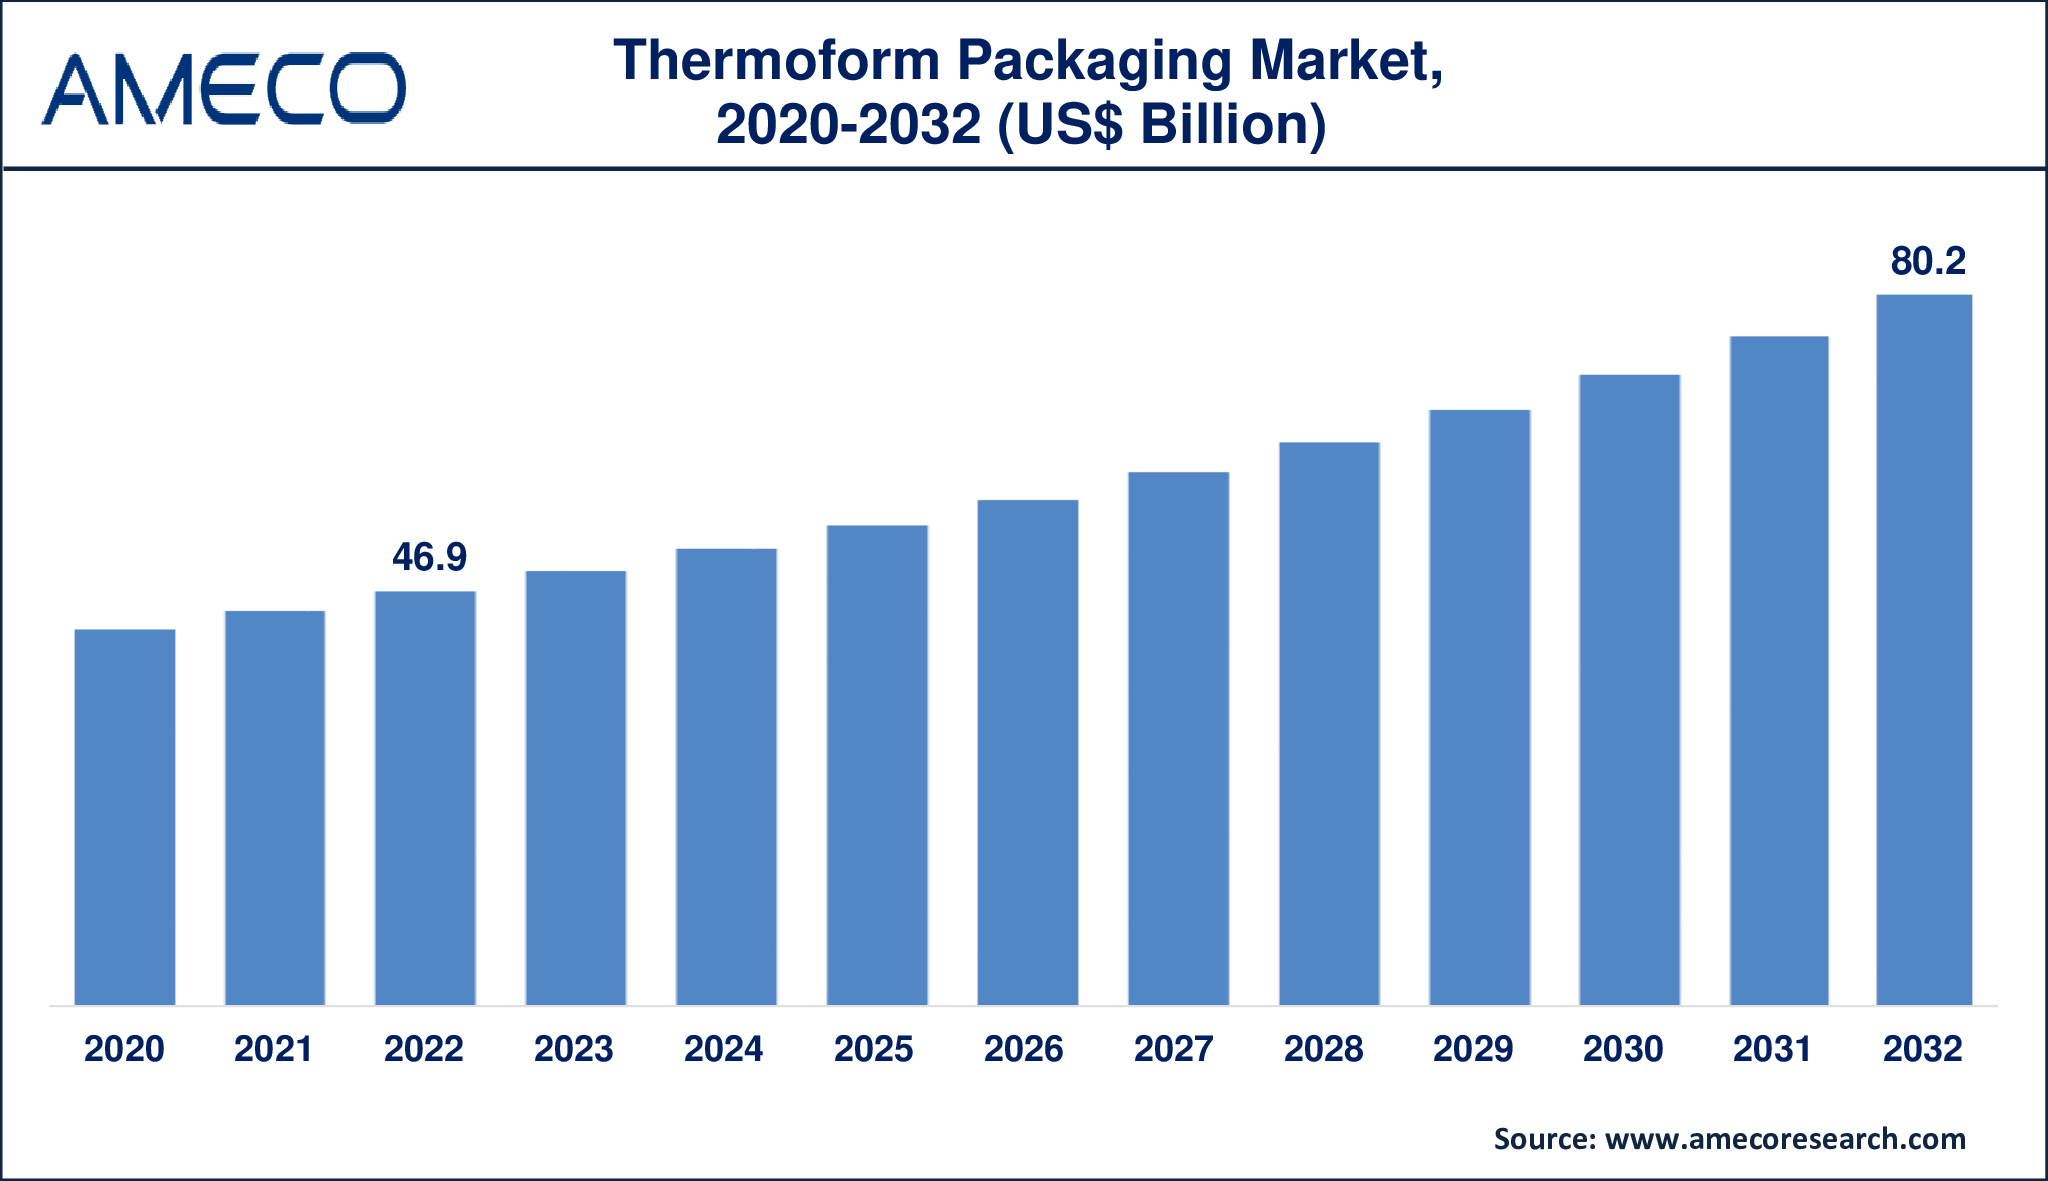 Thermoform Packaging Market Dynamics